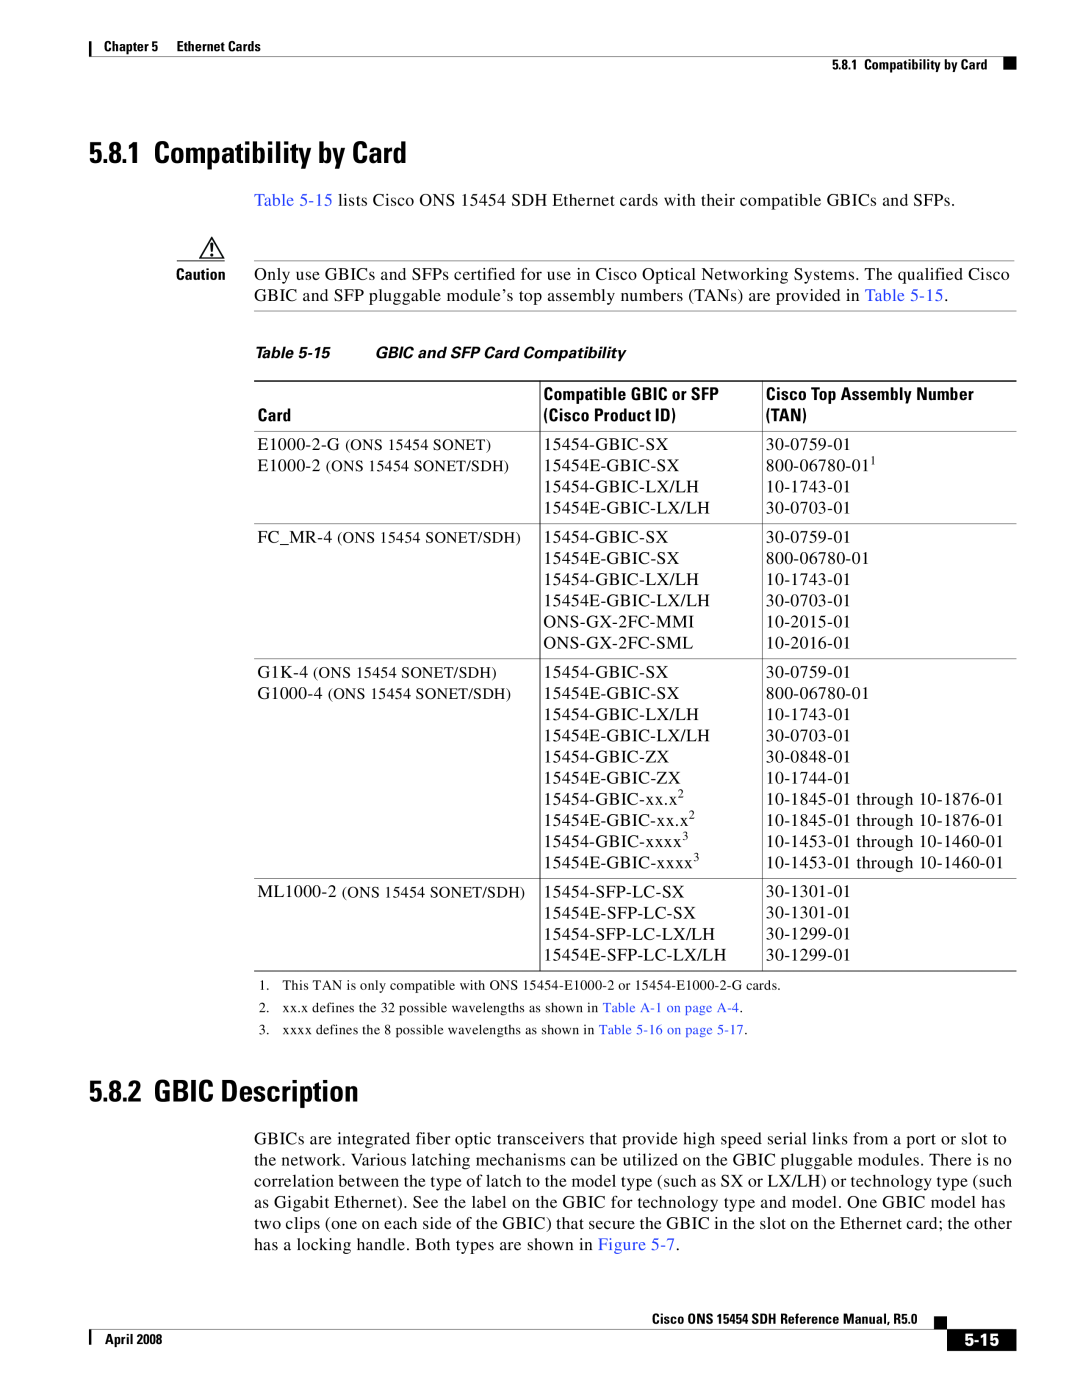 Cisco Systems ONS 15454 SDH Compatibility by Card, 5.8.2GBIC Description, 5-15, Compatible GBIC or SFP, Cisco Product ID 